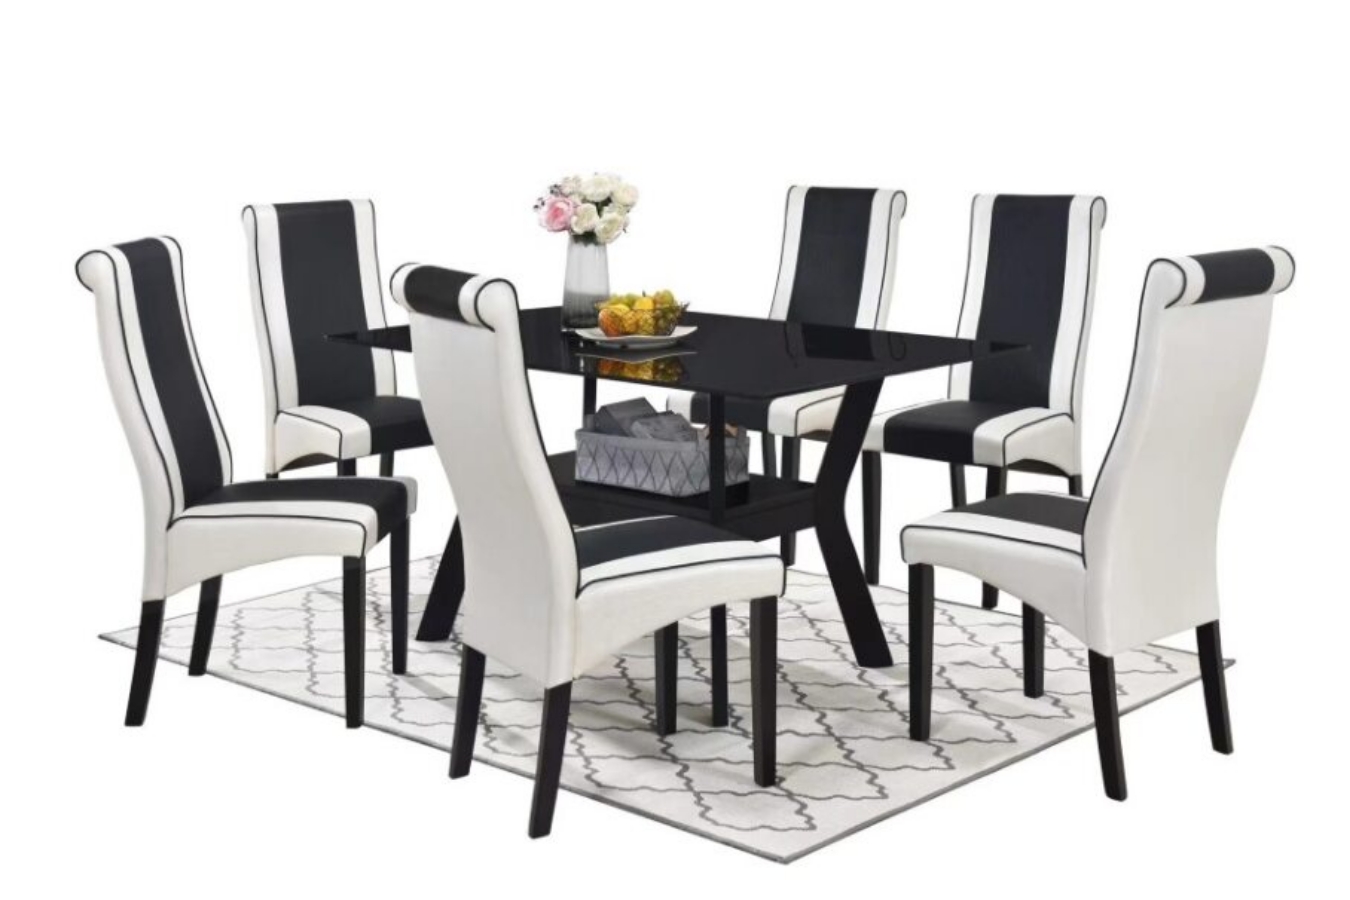 This Sarah Leatherette Dining Chair features an elegant and timeless design.